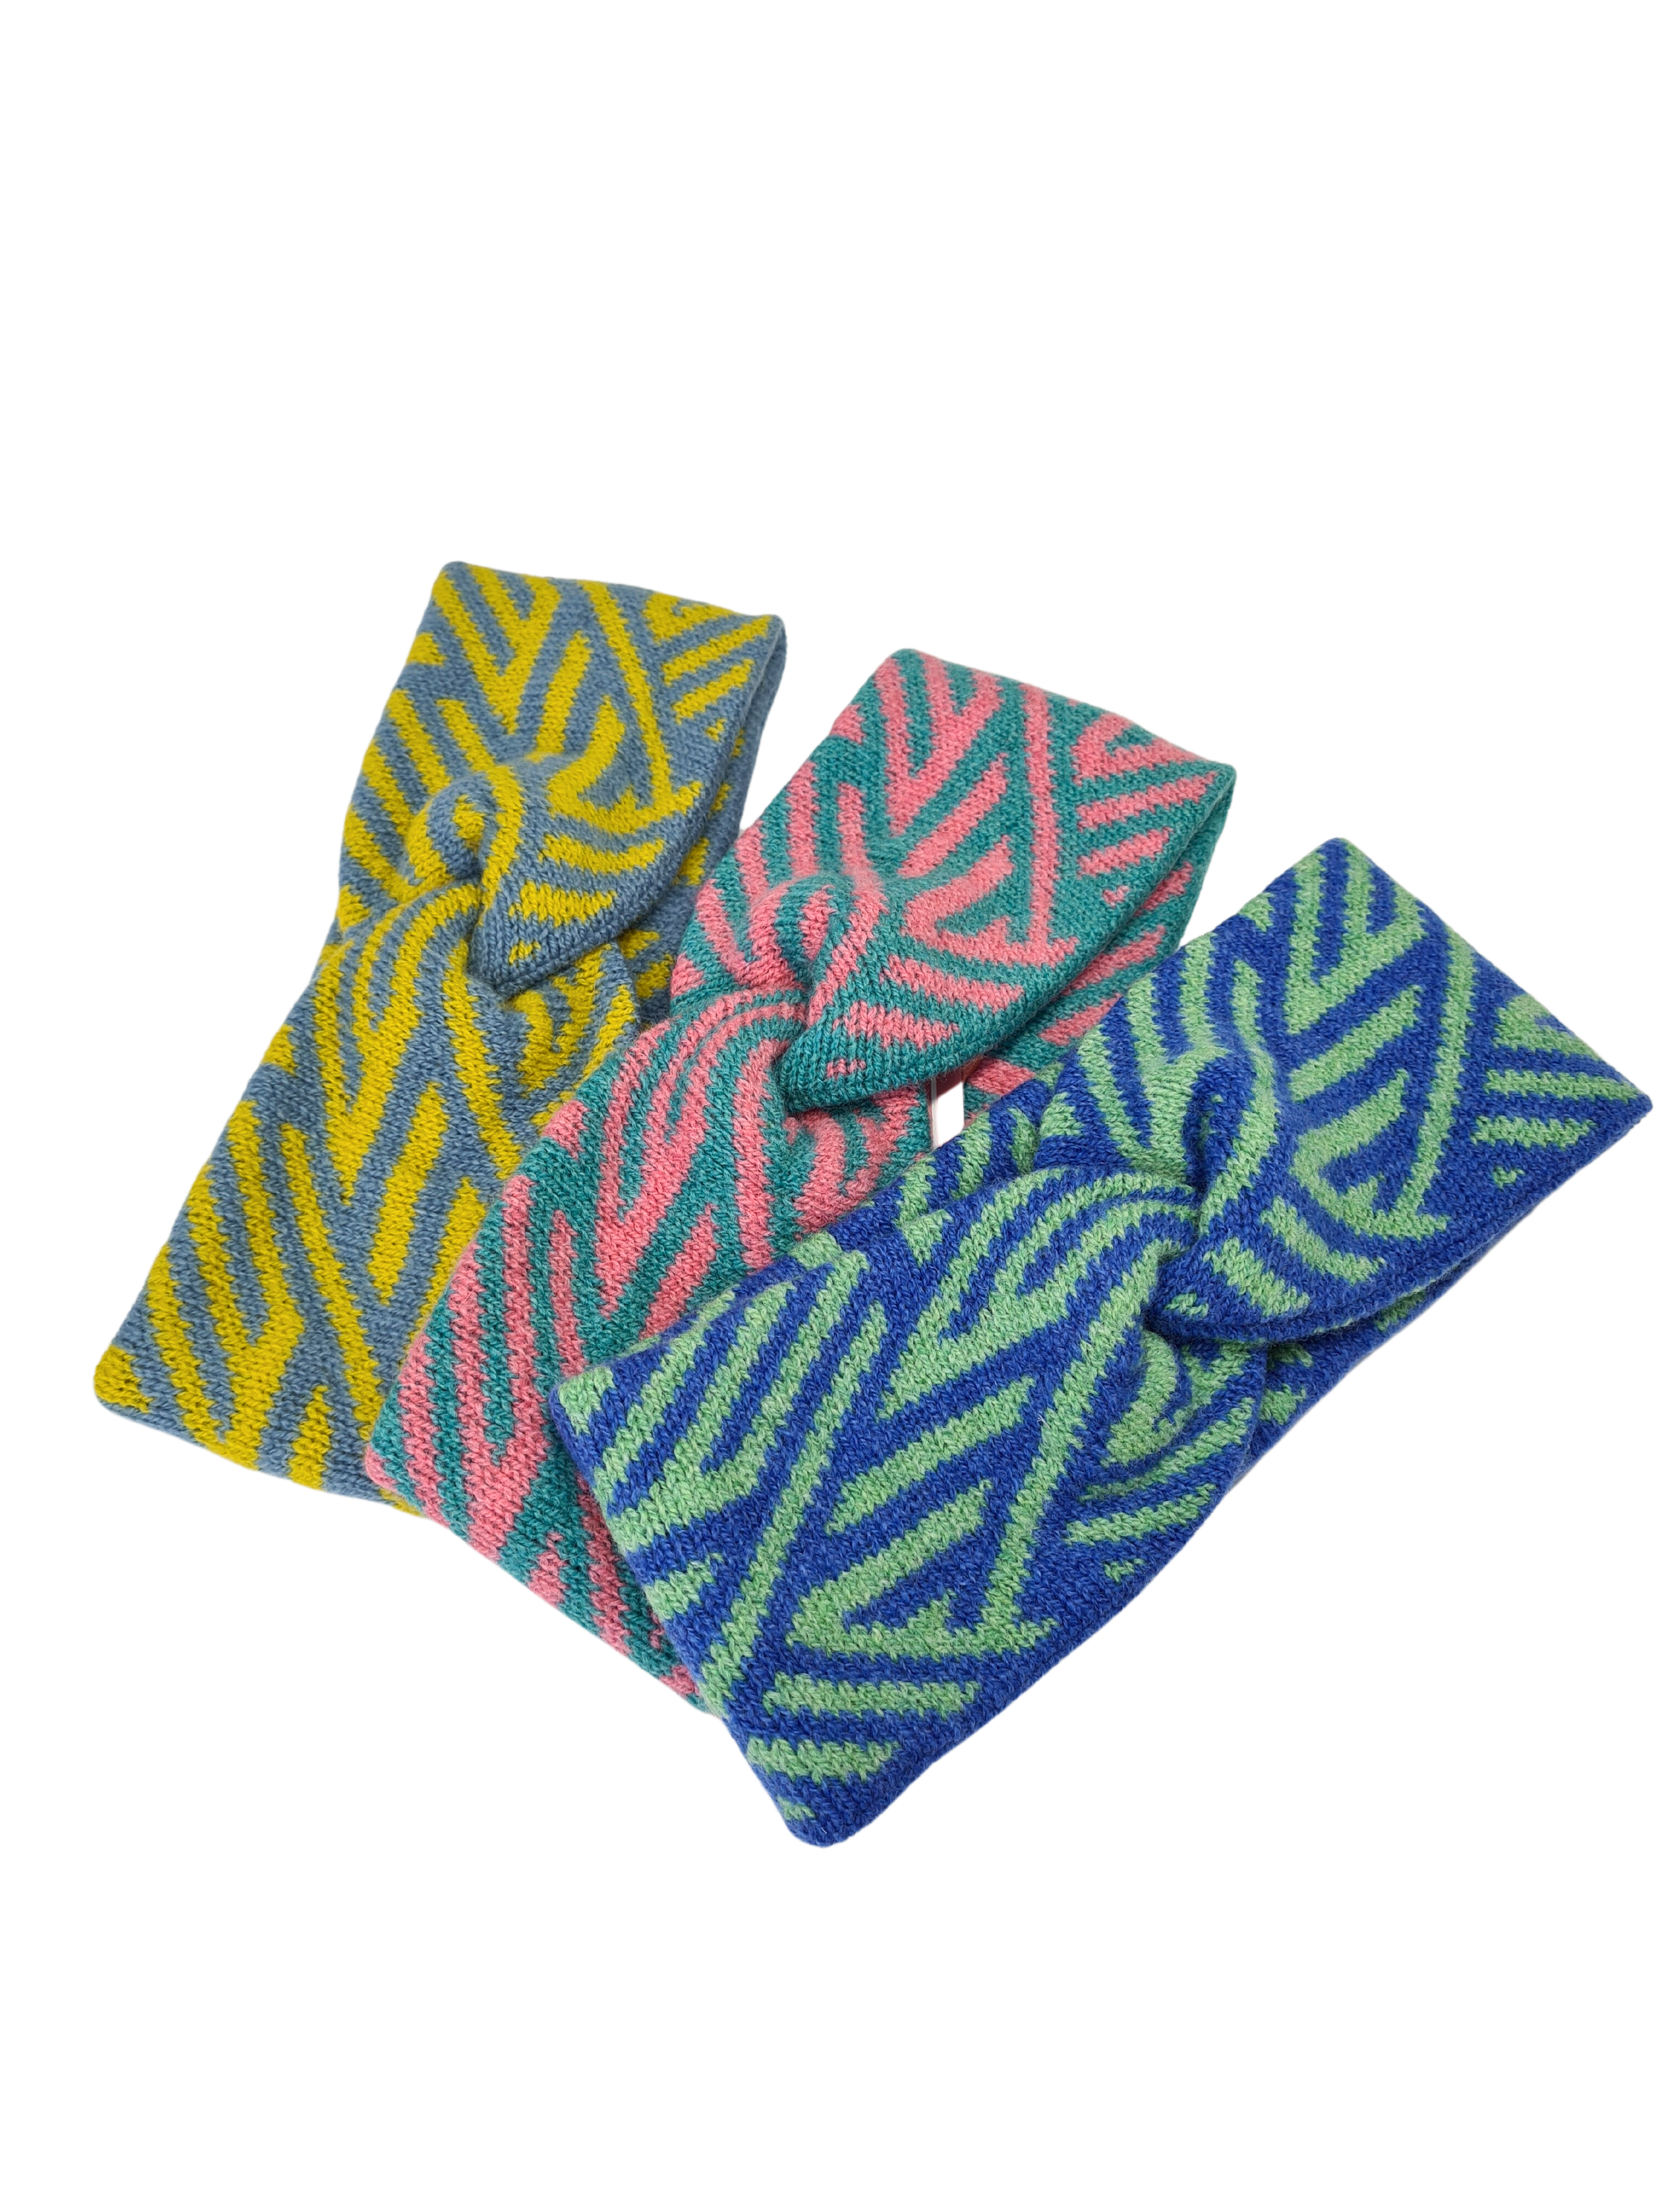 A selection of 3 twist headbands. The headbands have a crosswise pattern in yellow and blue, pink and turquoise, green and blue.